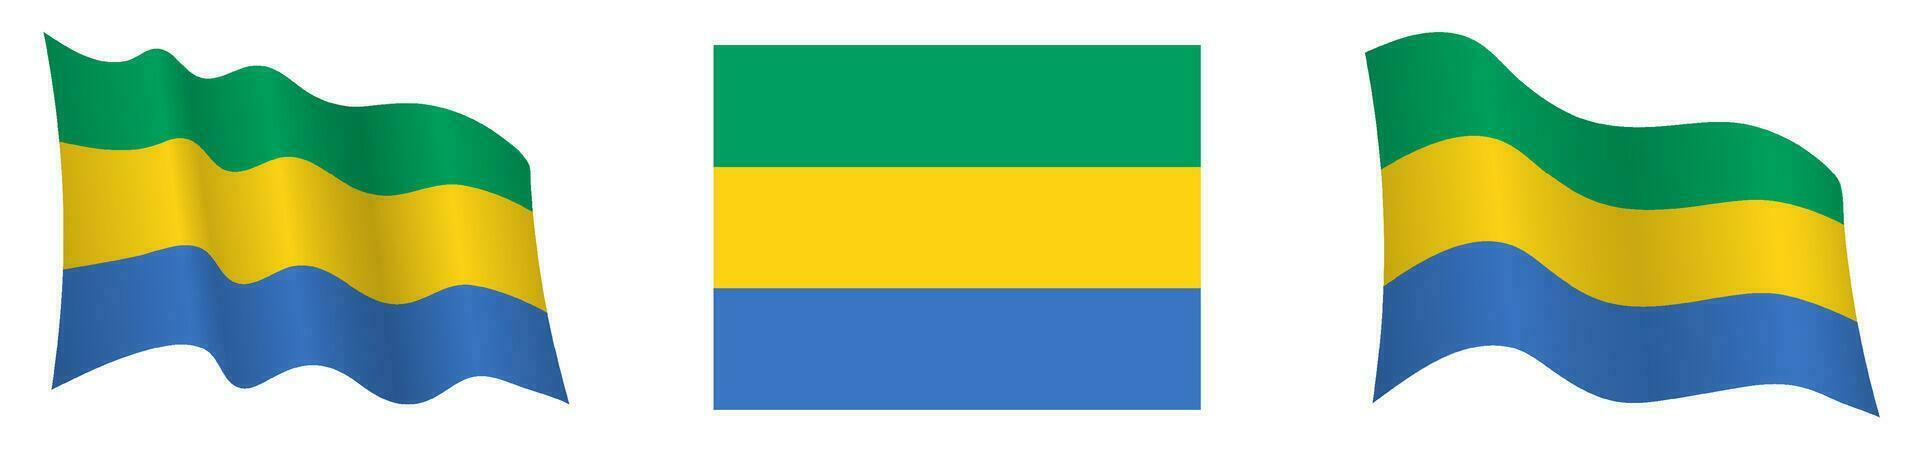 flag of Gabon in static position and in motion, fluttering in wind in exact colors and sizes, on white background vector